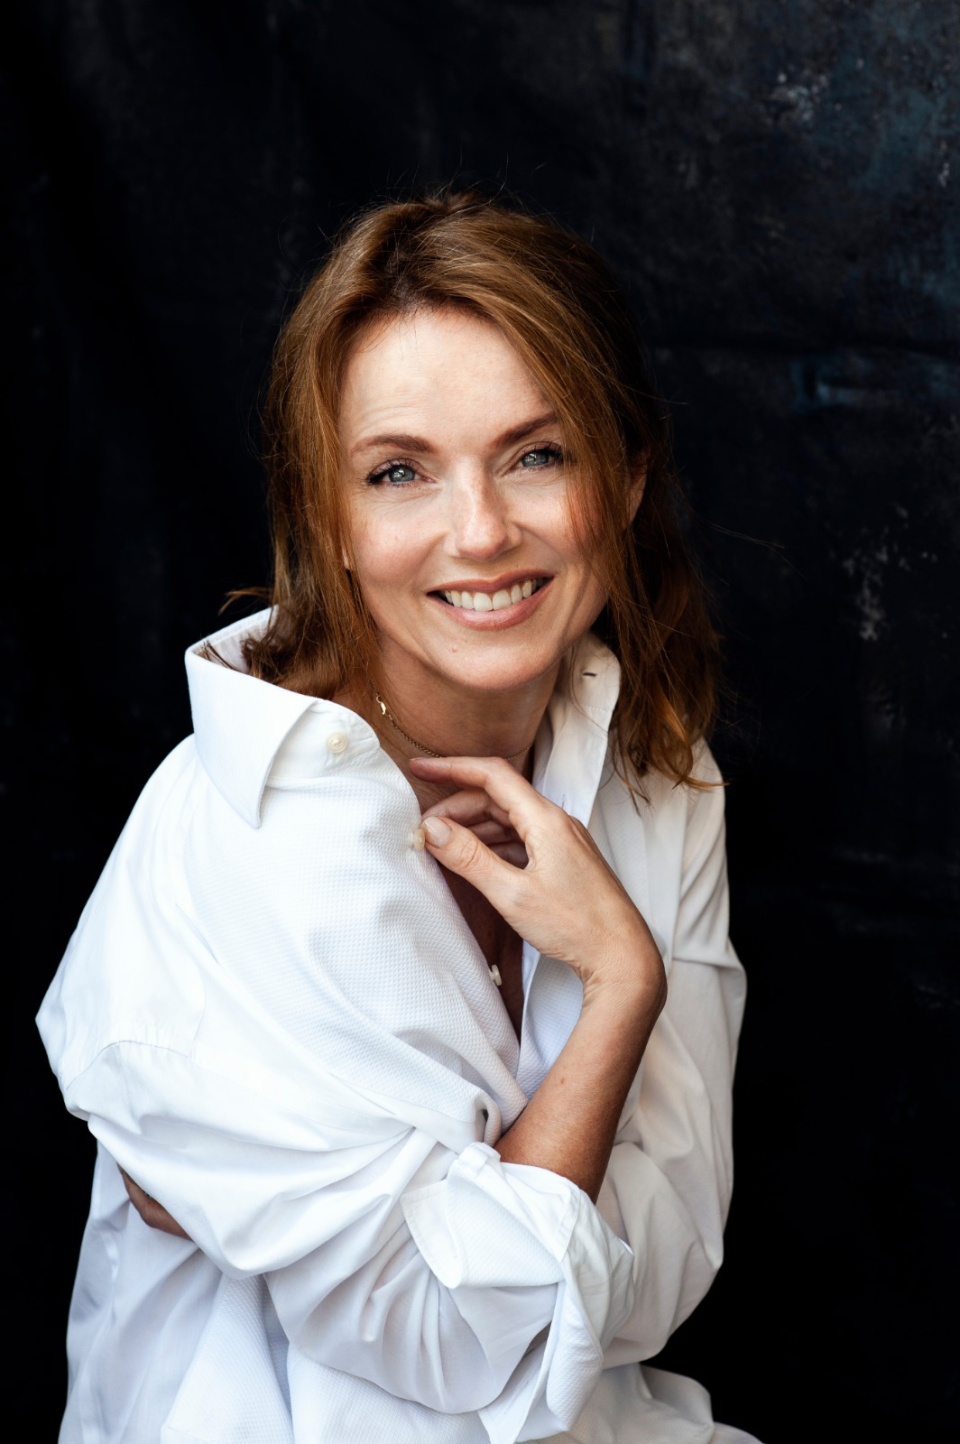 Geri Halliwell-Horner is known for her tenure in The Spice Girls, but she's also an accomplished author.